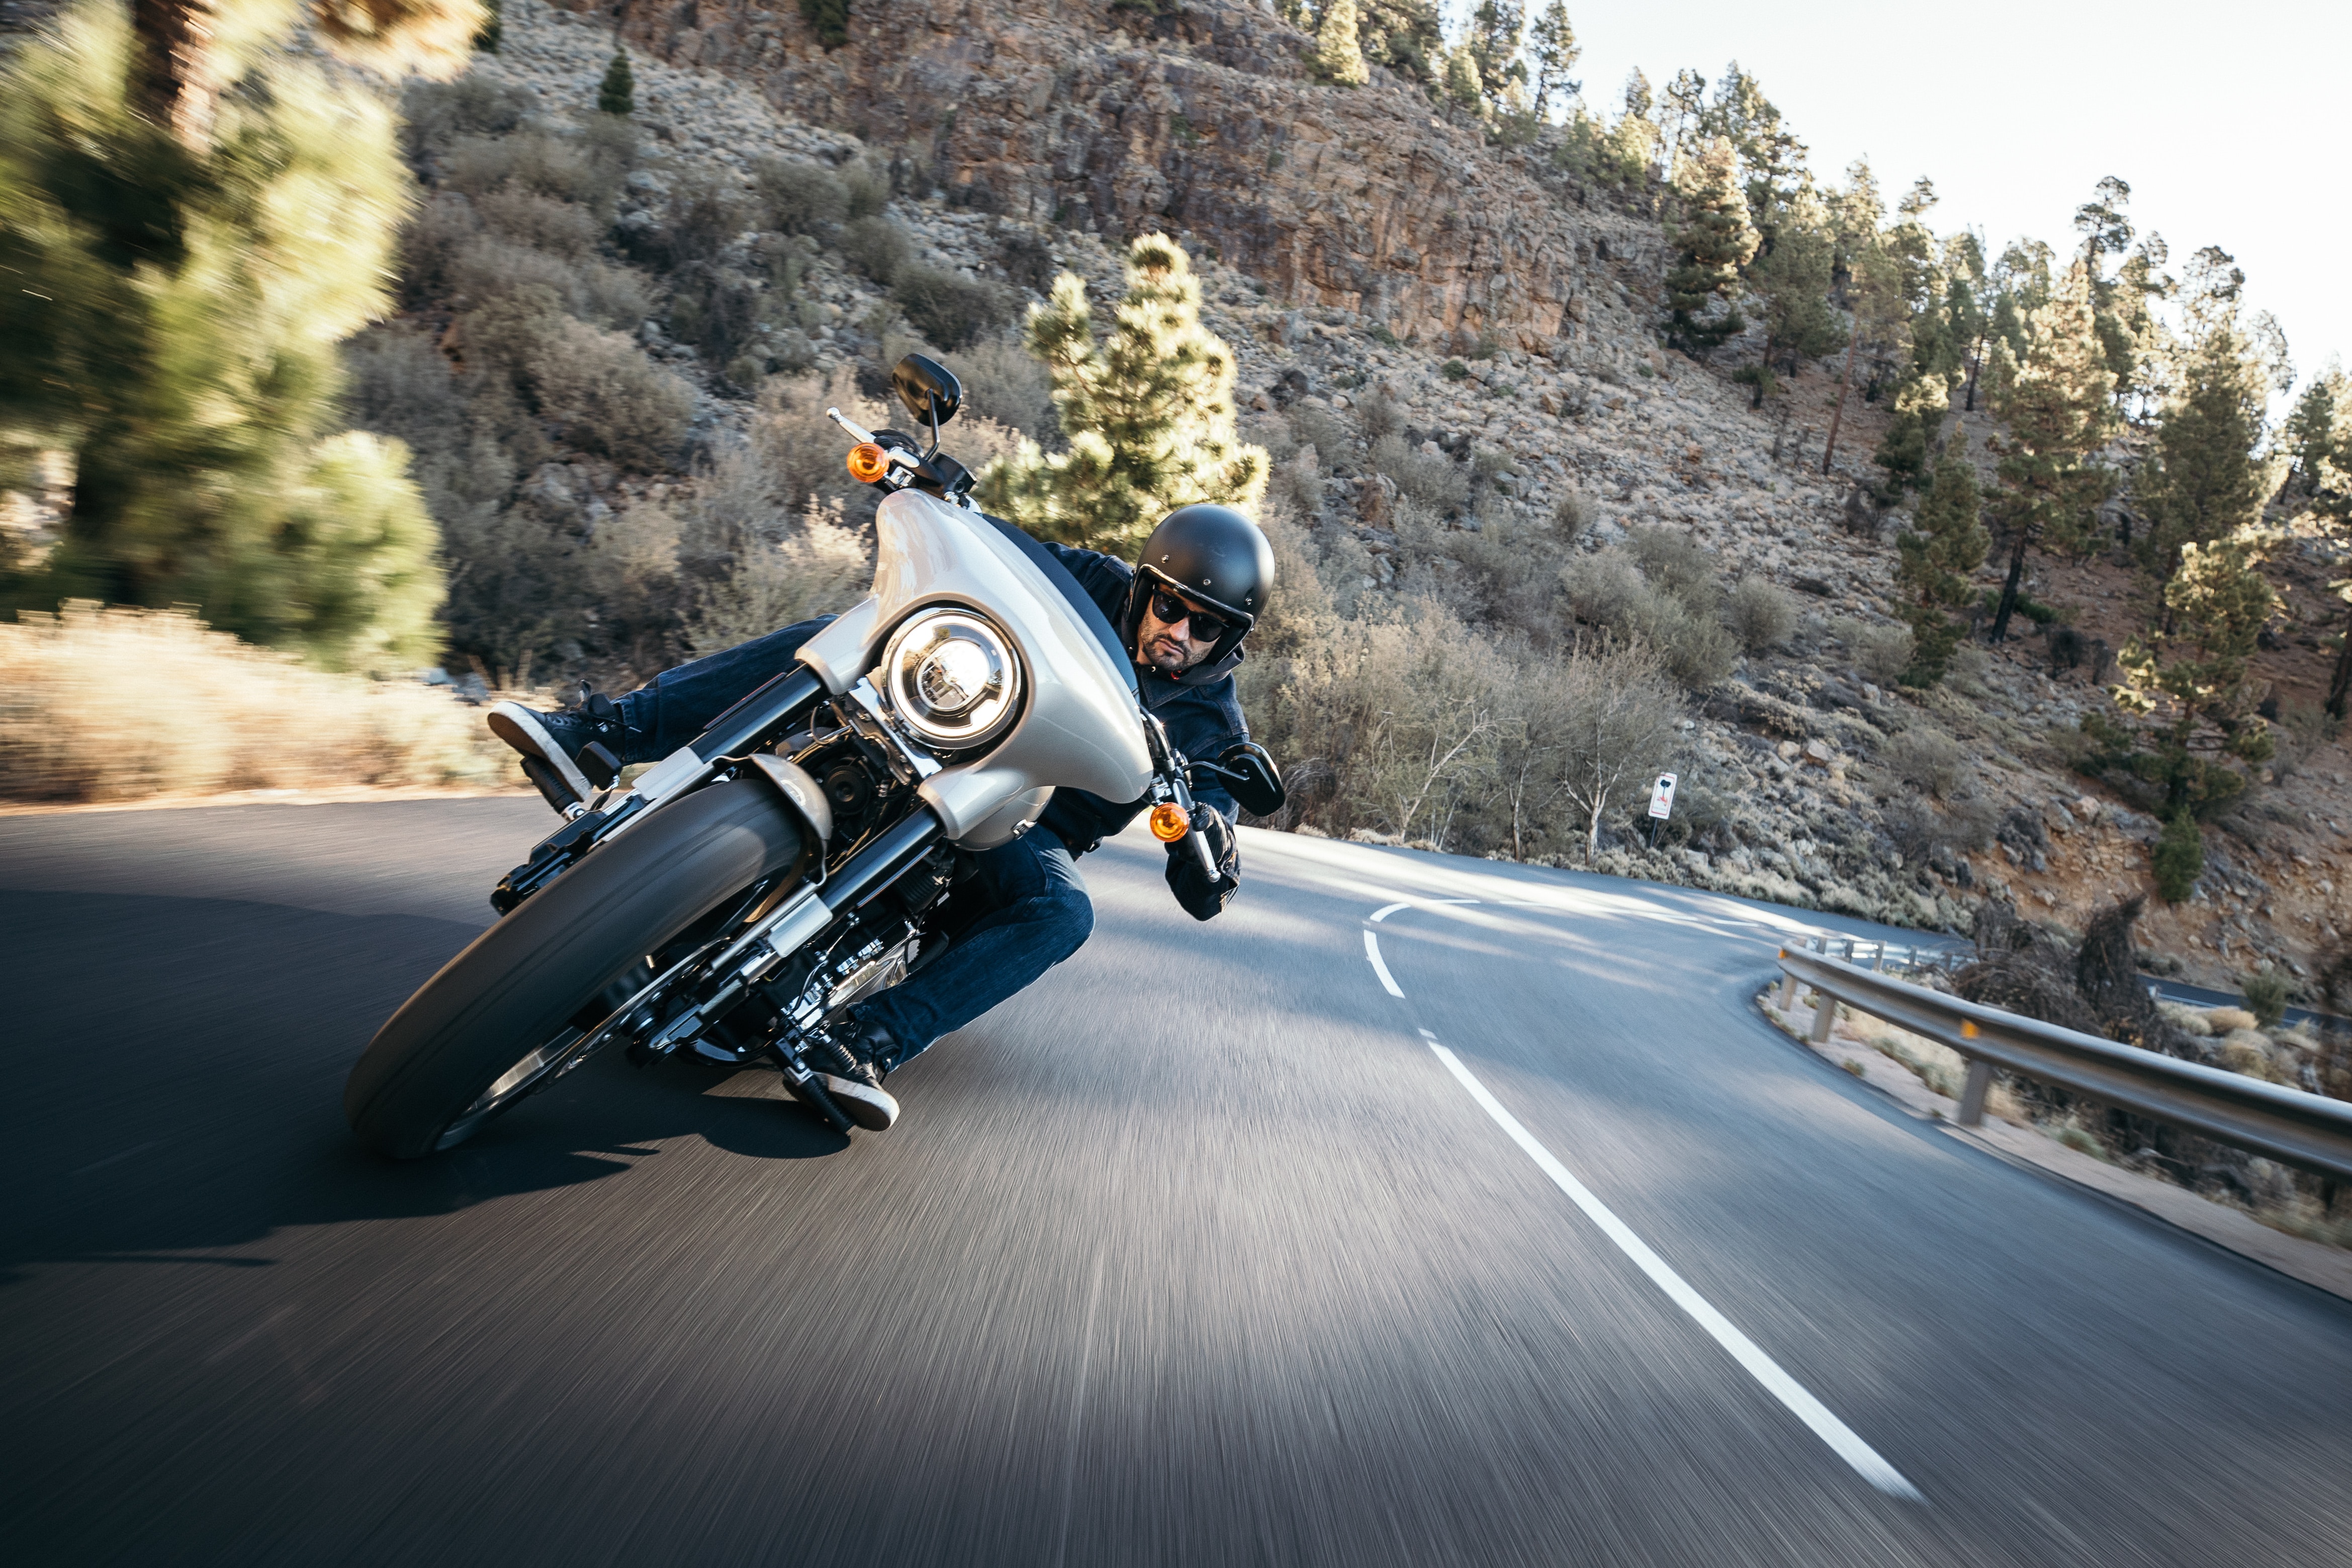 Storing Your Motorcycle: Tips for Keeping It Safe and Secure